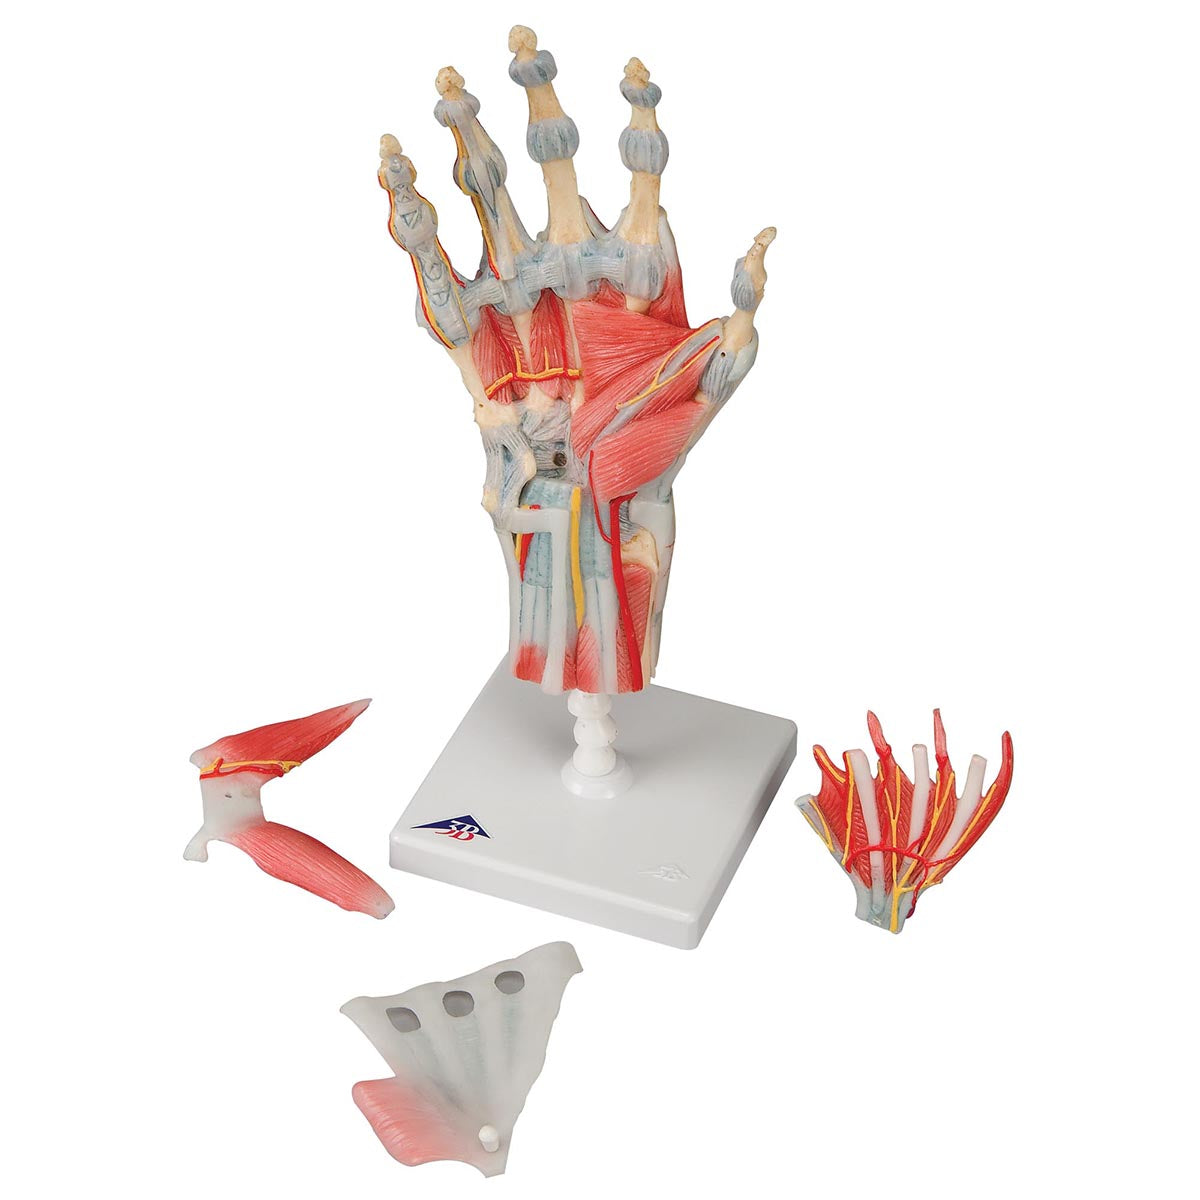 M33/1 Hand Skeleton Model with Ligaments & Muscles - 3B Smart Anatomy